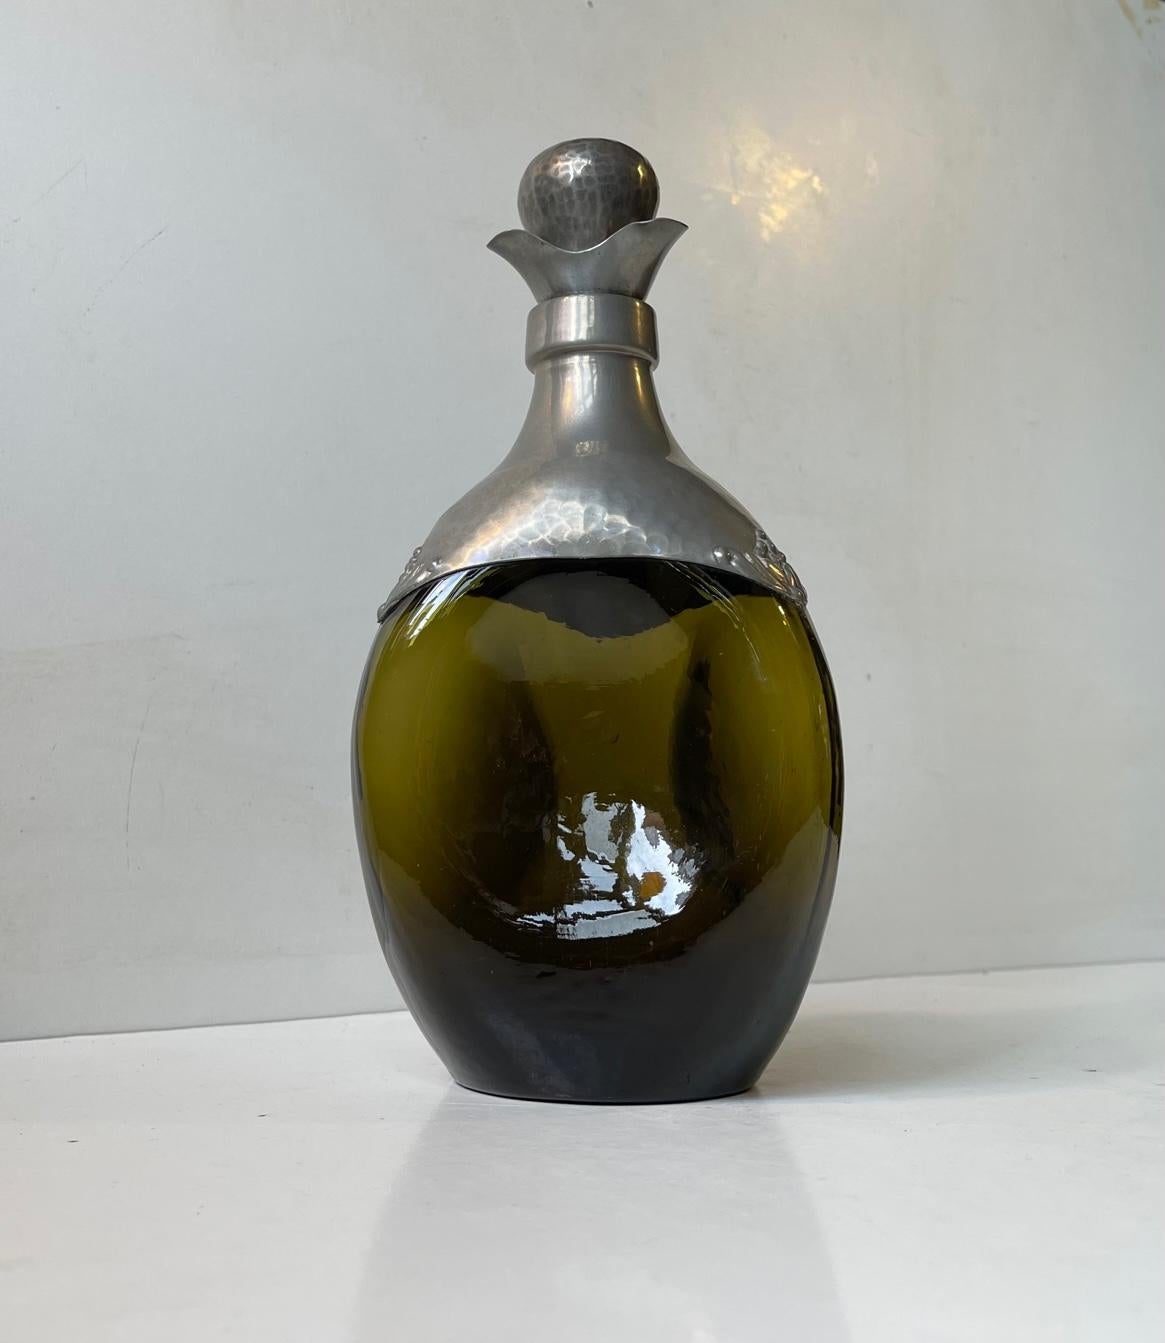 A rare beautiful decanter in green hand-blown glass. Decorated with hand-set/fitted panels of lightly hammered pewter. Original stopper in pewter and cork. Distinct Danish Jugendstil - art nouveau styling reminiscent of Thorvald Bindesbøll. Made in